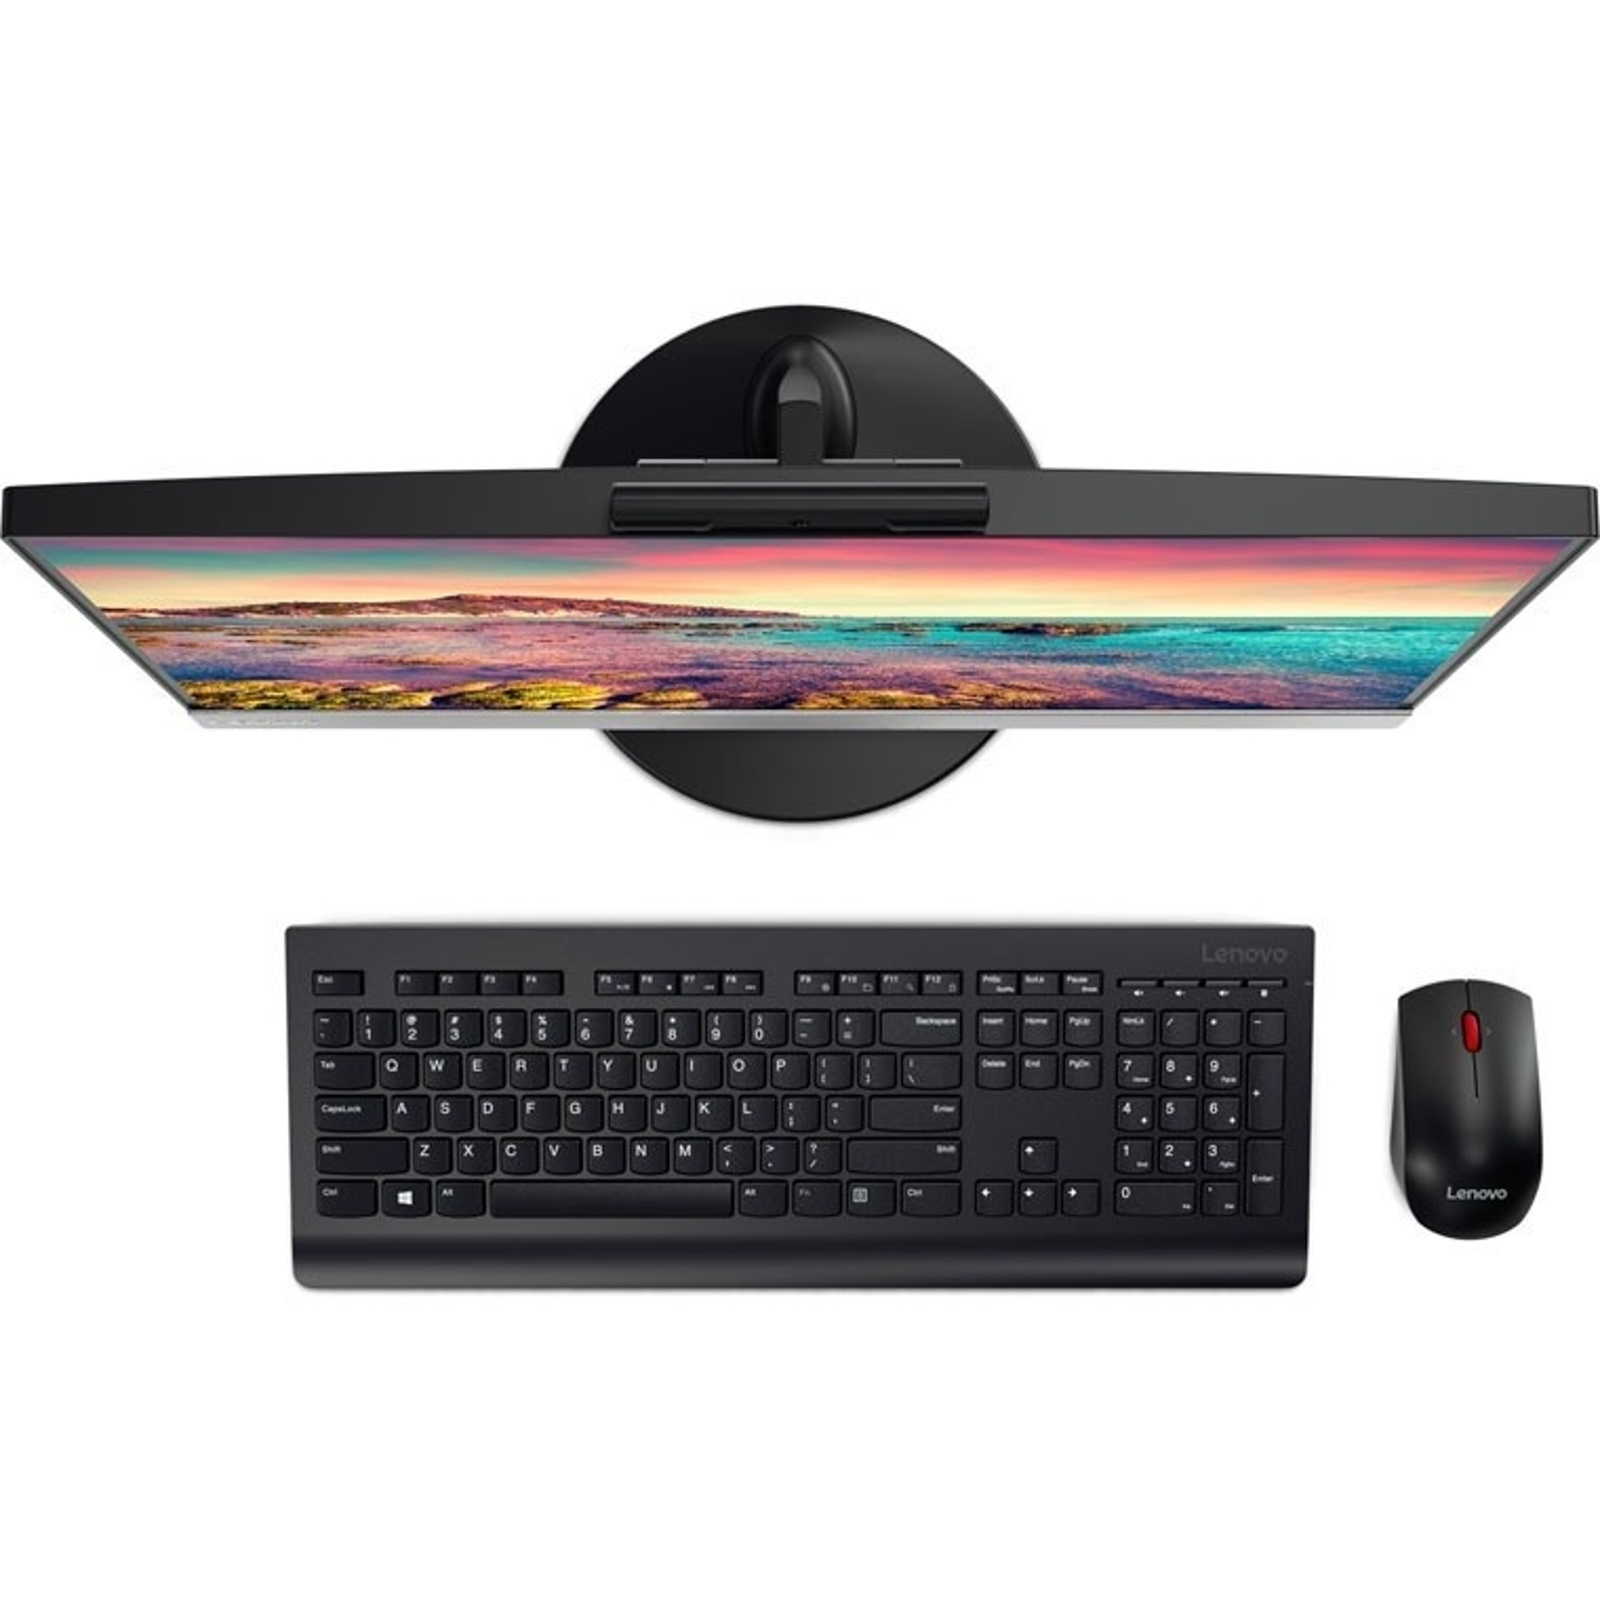 LENOVO AIO V410Z 10R5000BTX I5-7400T 4GB 500GB 2GB AMD R530 21.5" FHD NONTOUCH FREE-DOS SIYAH ALL IN ONE PC